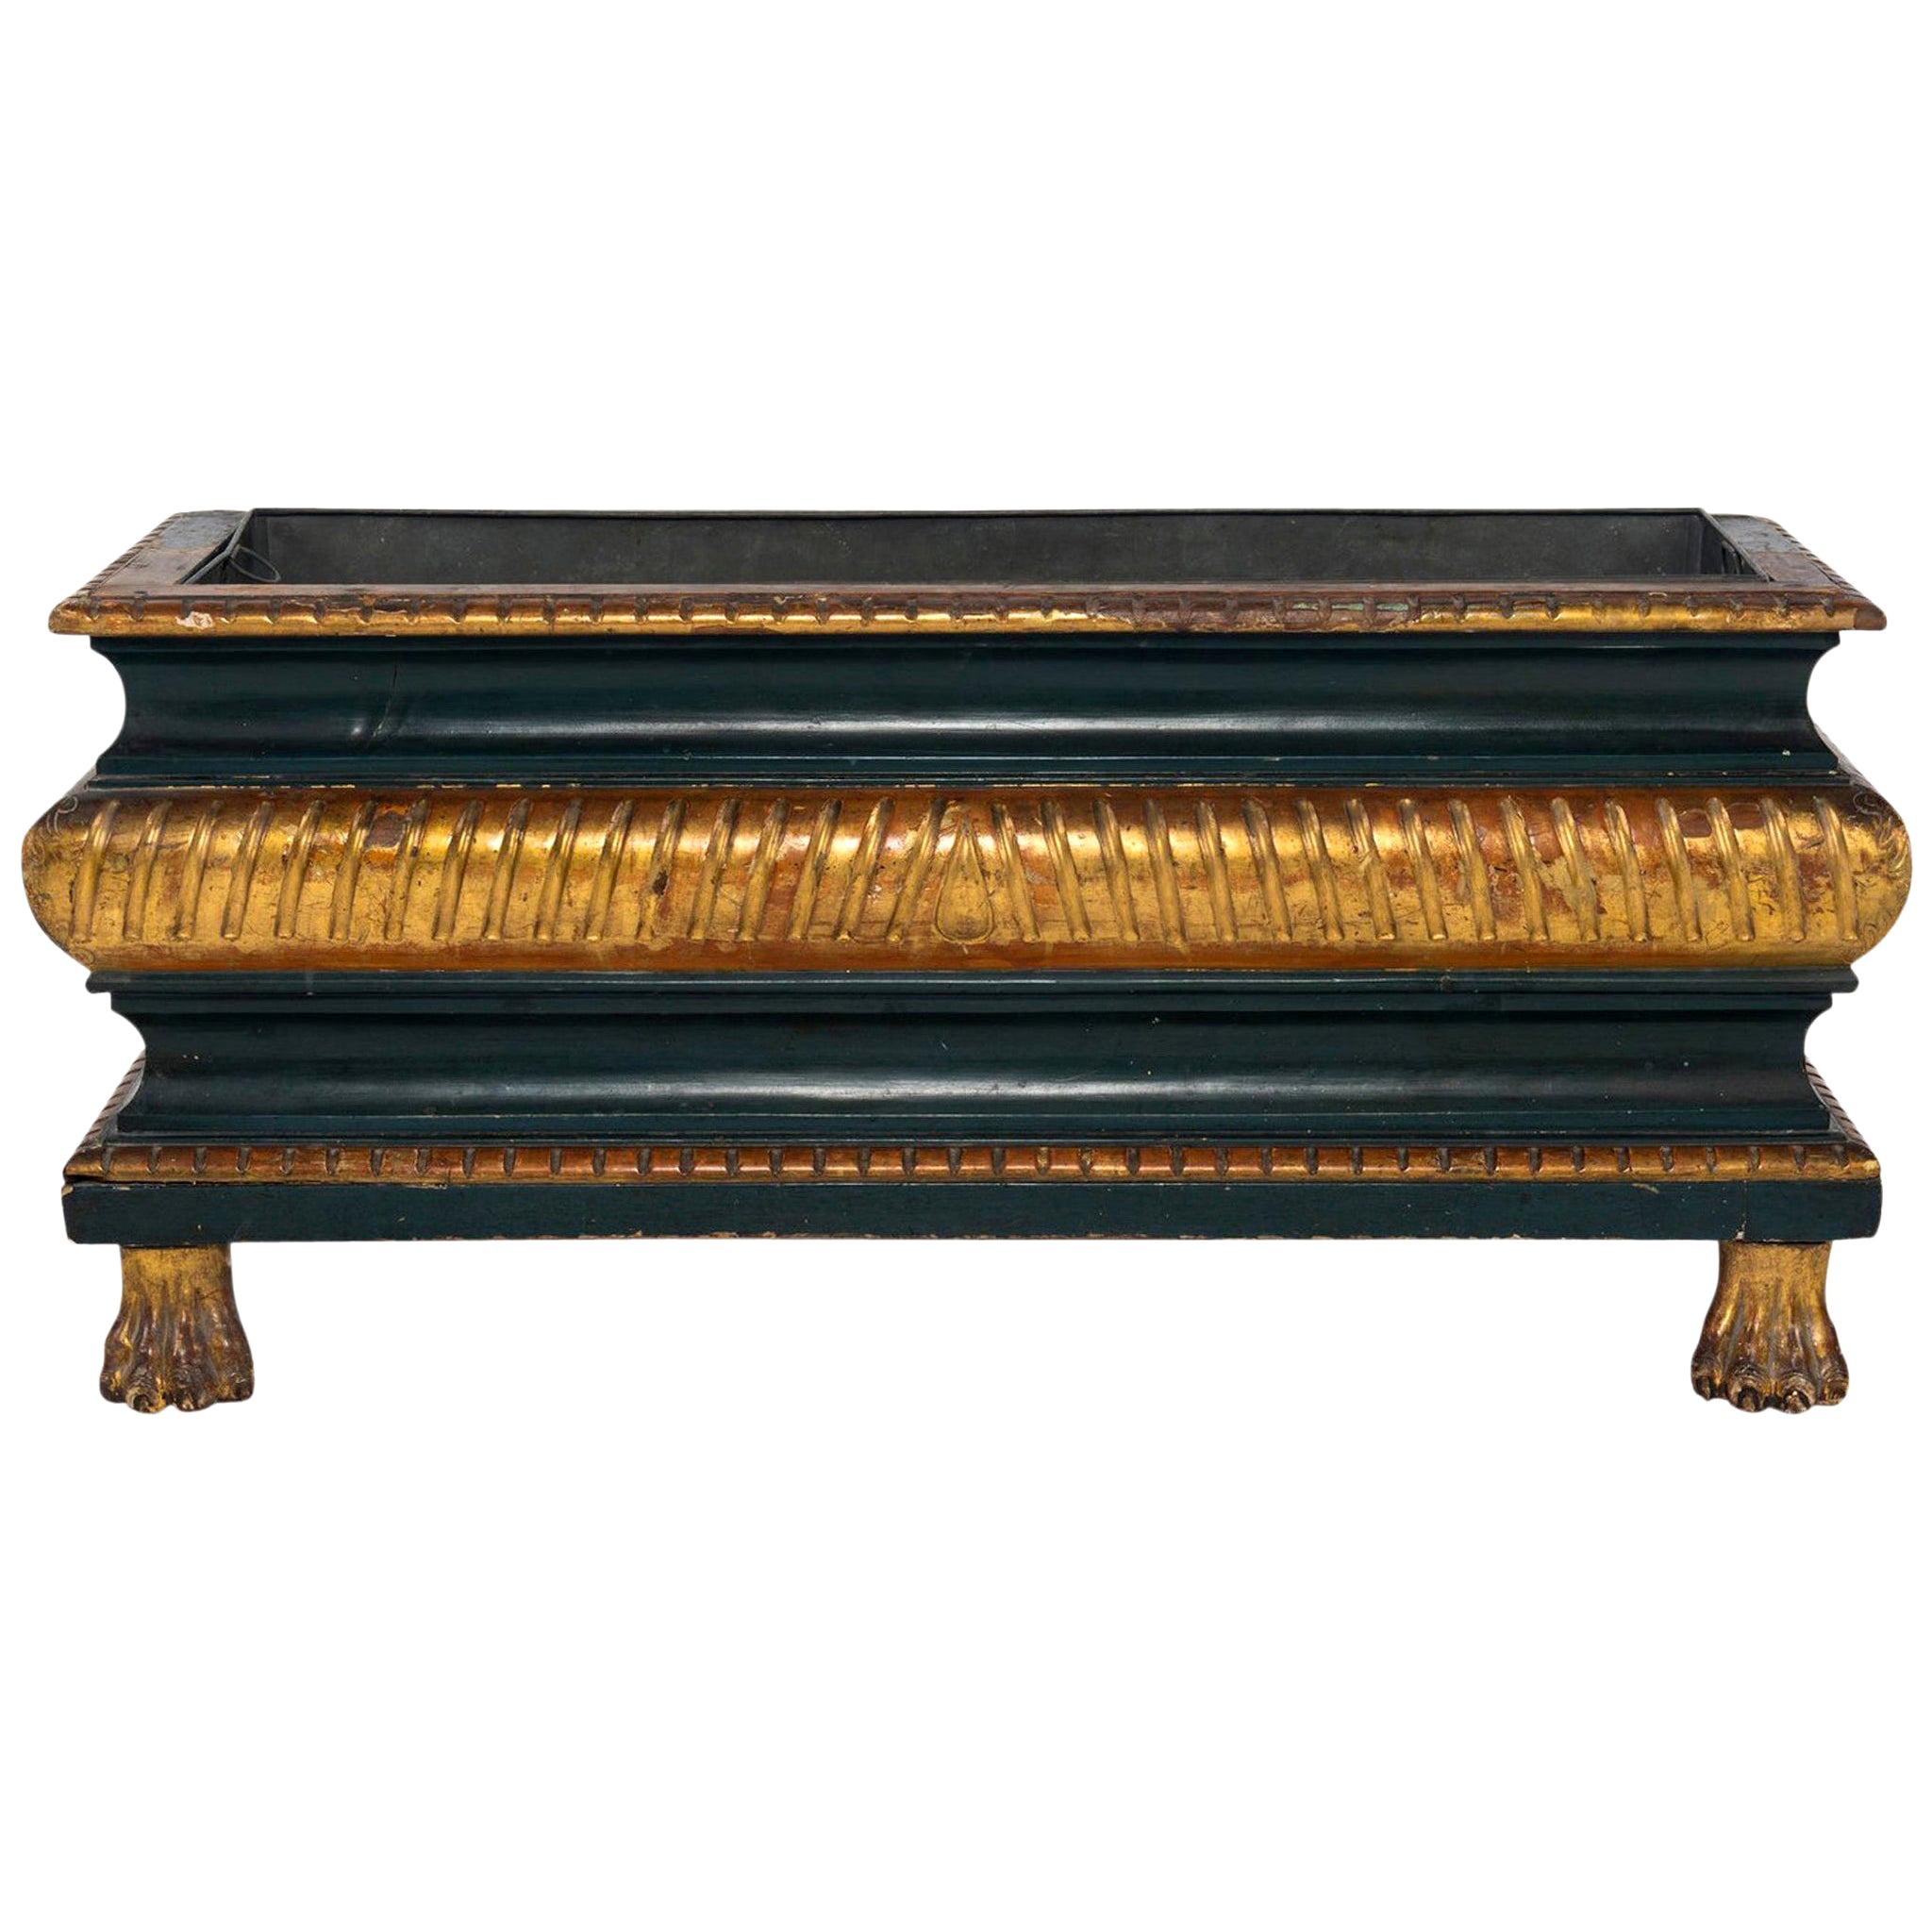 19th Century Italian Painted and Giltwood Jardinière